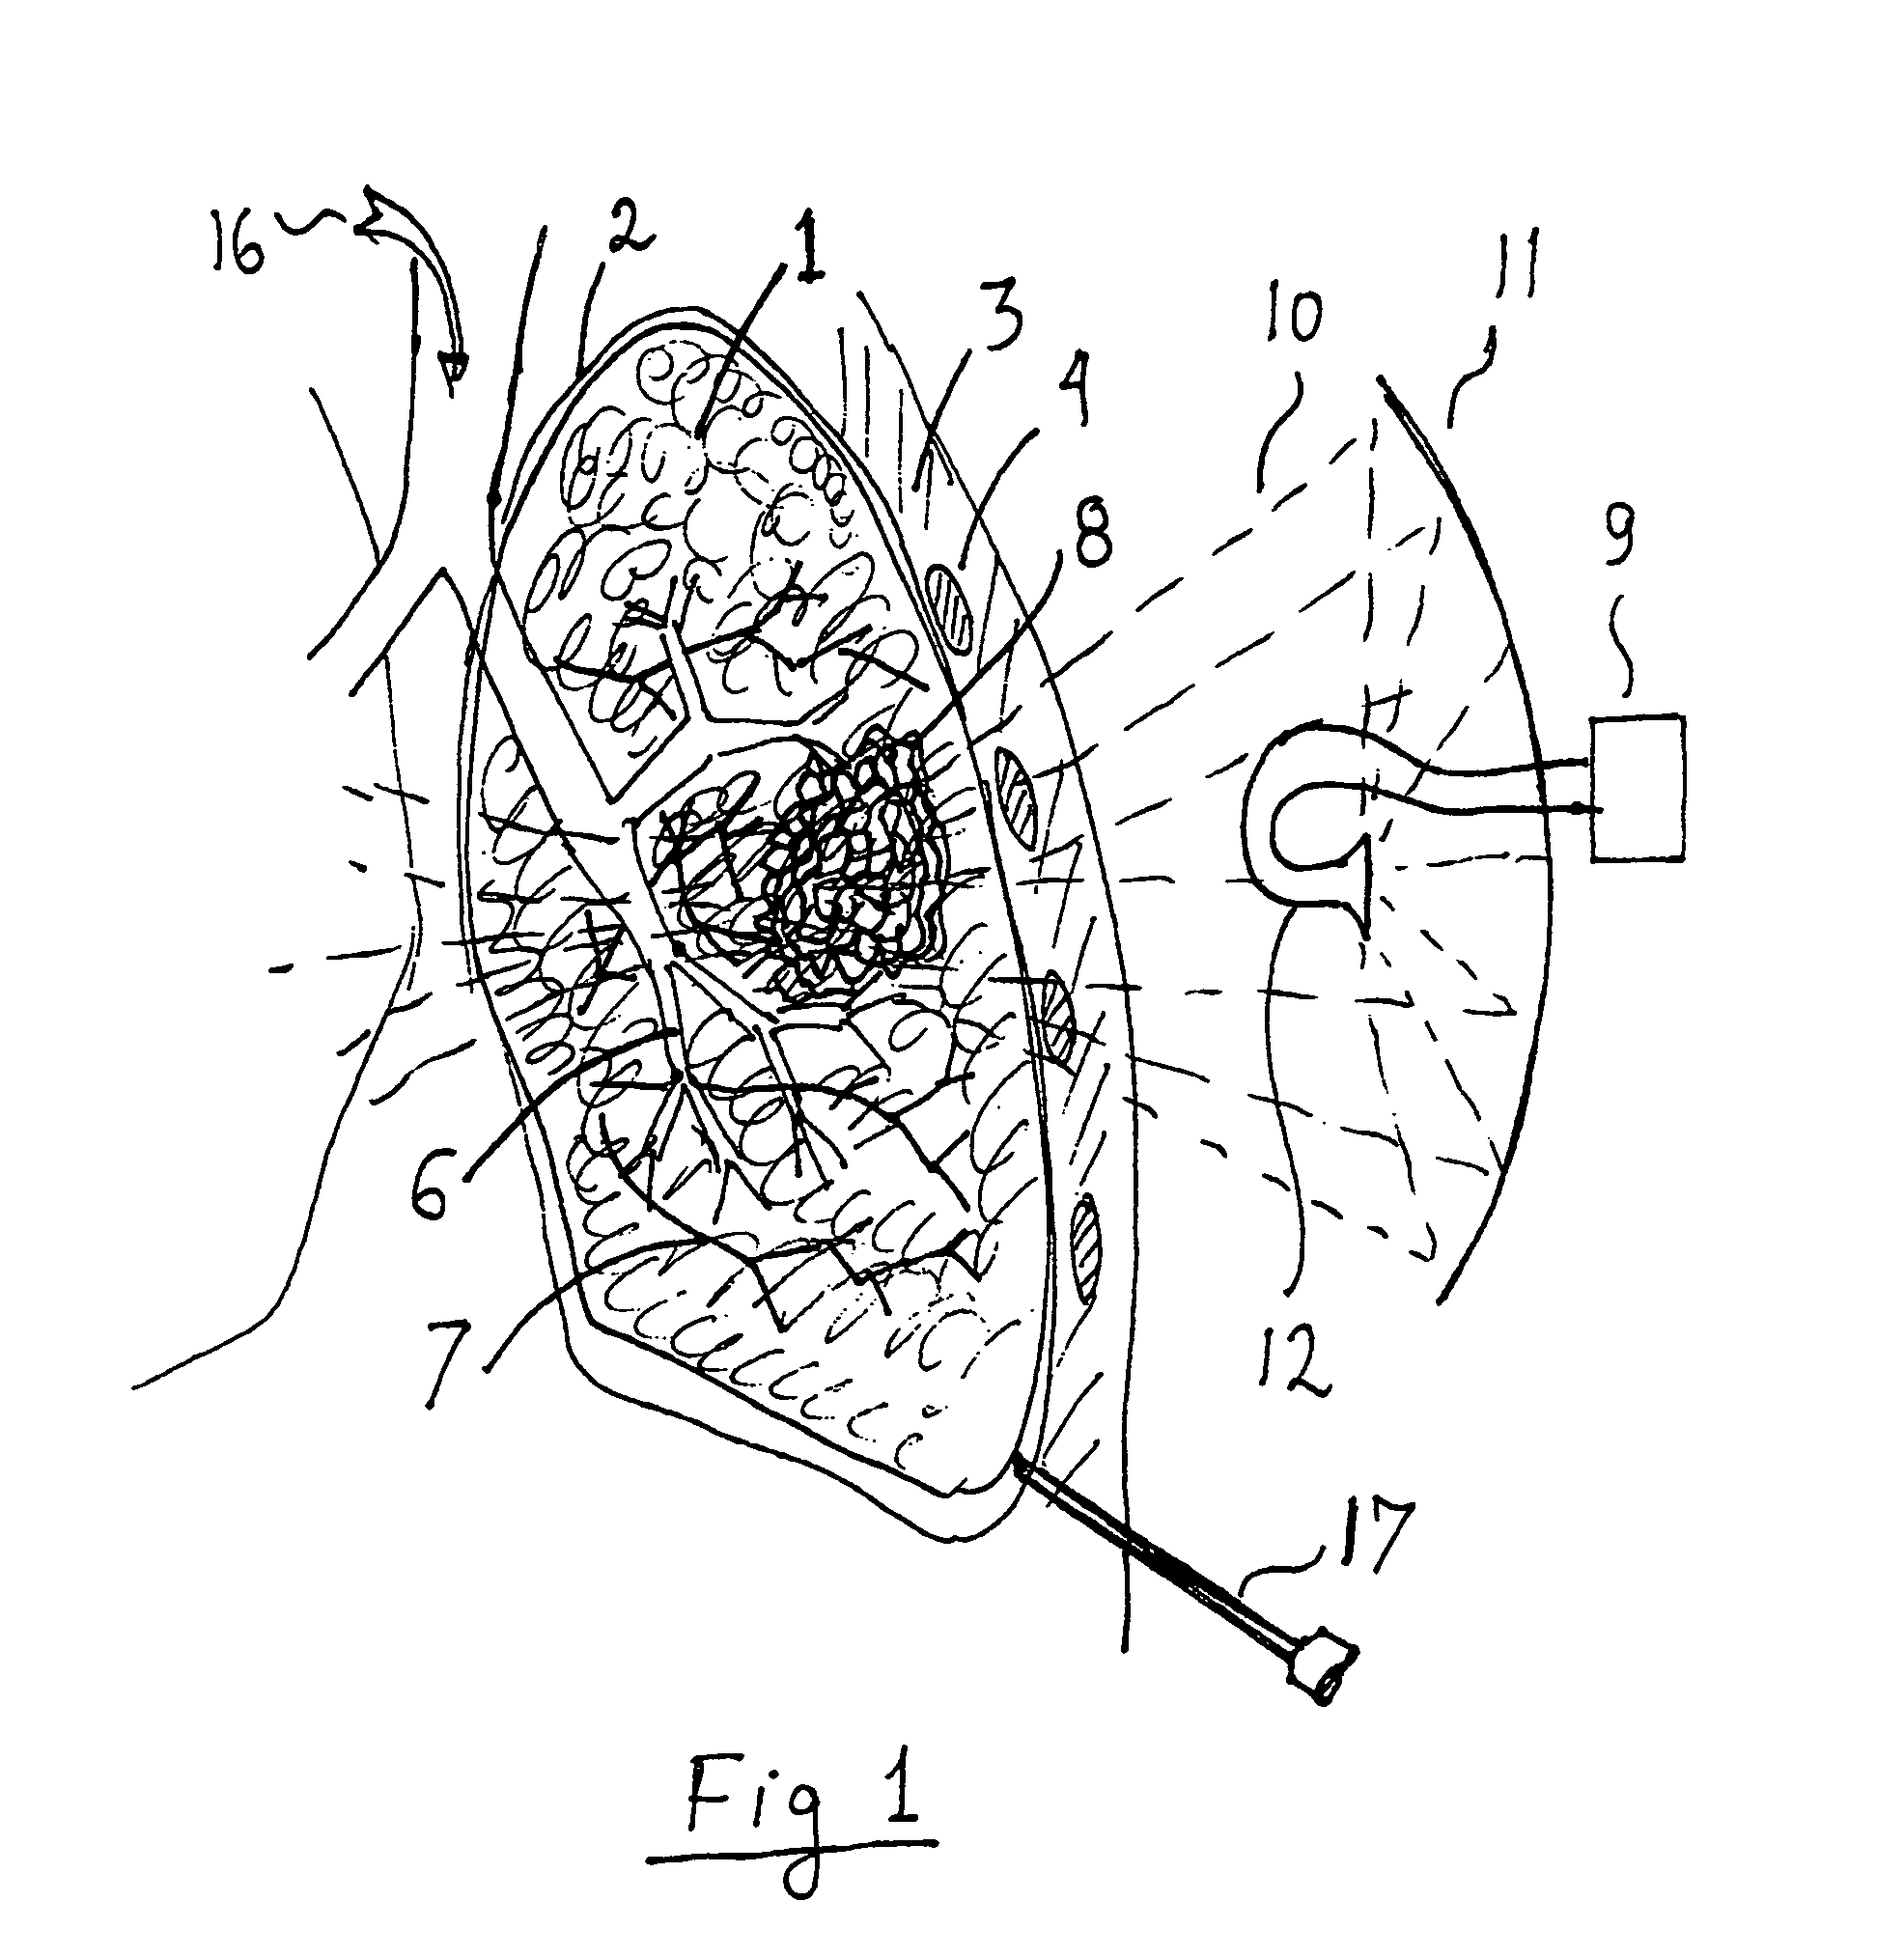 Methods for selectively heating tissue